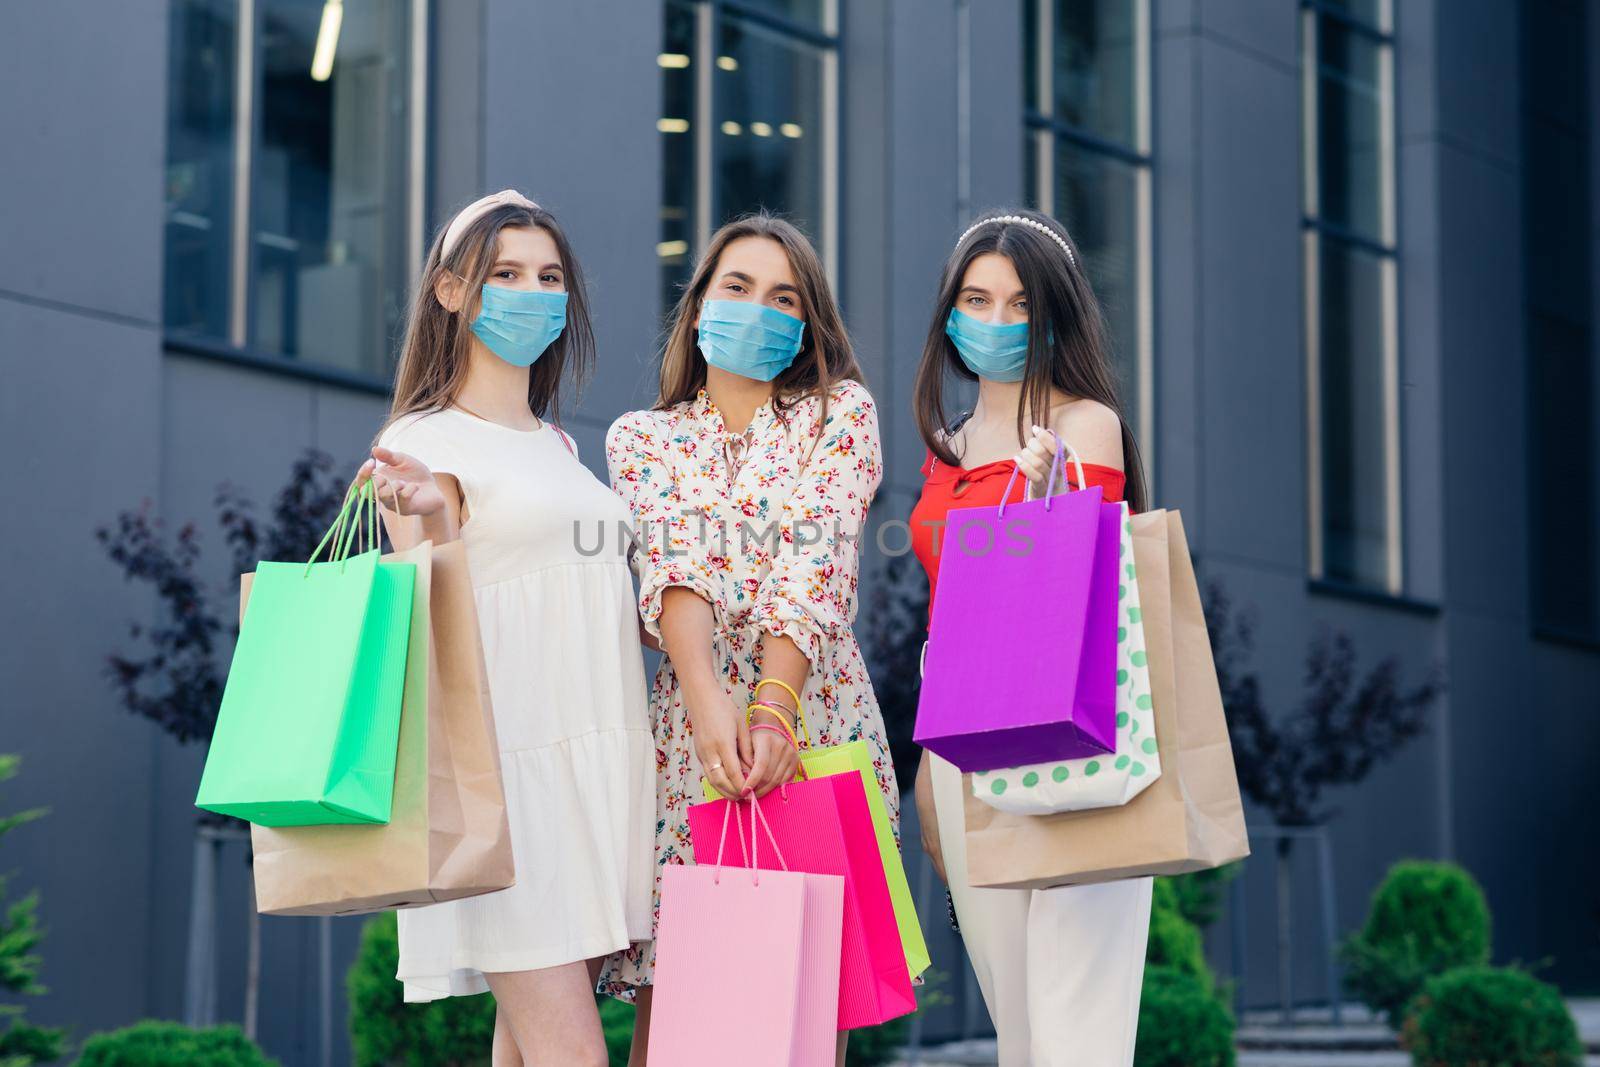 Group of young beautiful women in casual dresses, top and pants wearing masks to protect coronavirus pandemic standing in front of the shopping mall with colored bags in hands.